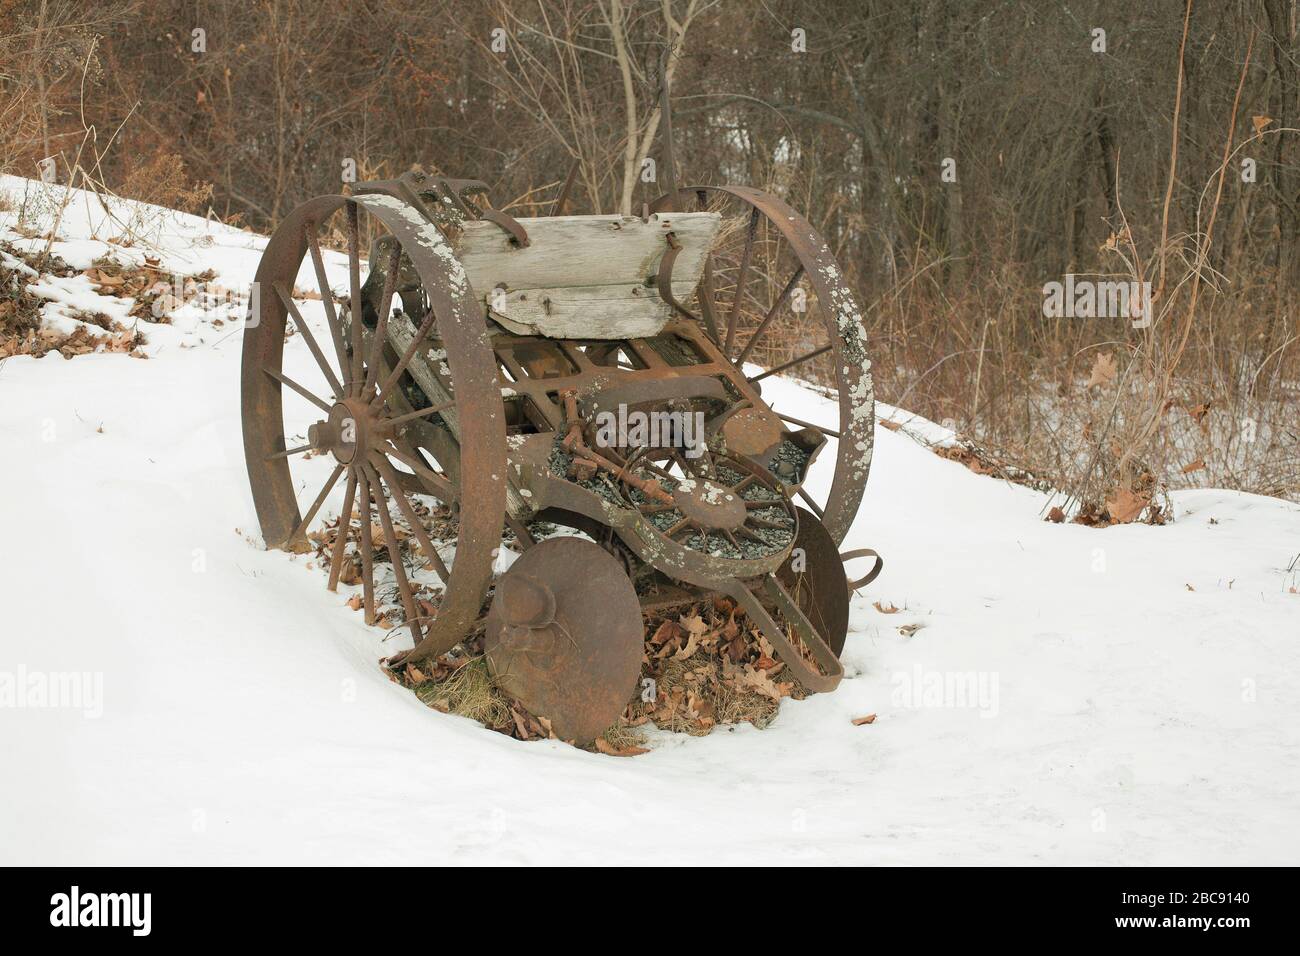 Vintage 100 year old potato planter sits idle on a snowy field in Massachusetts. Stock Photo